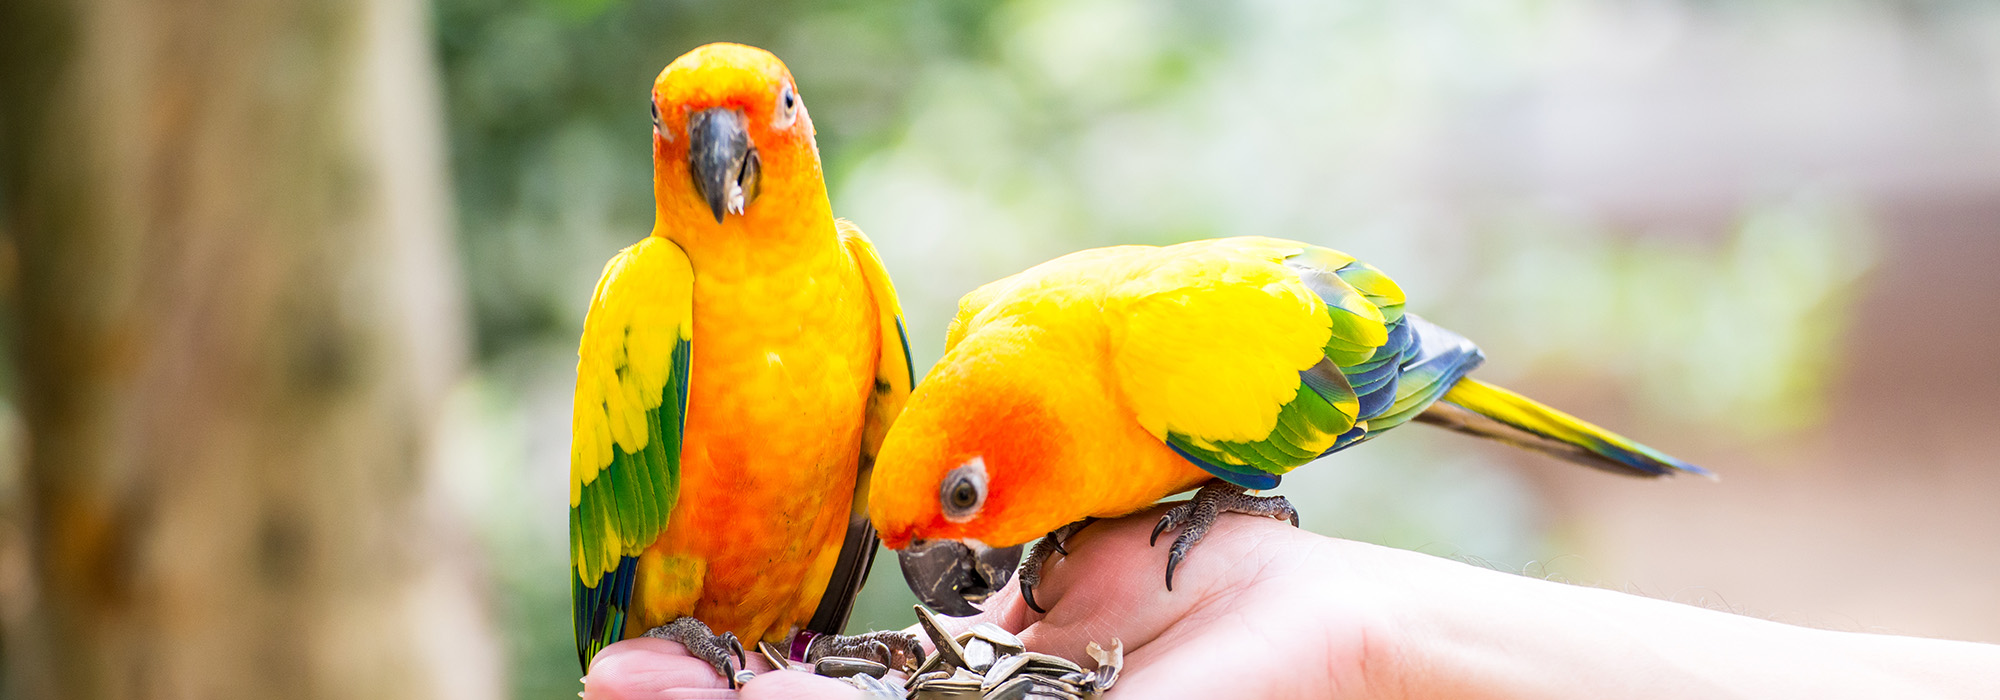 Two brightly coloured birds eating out of a hand